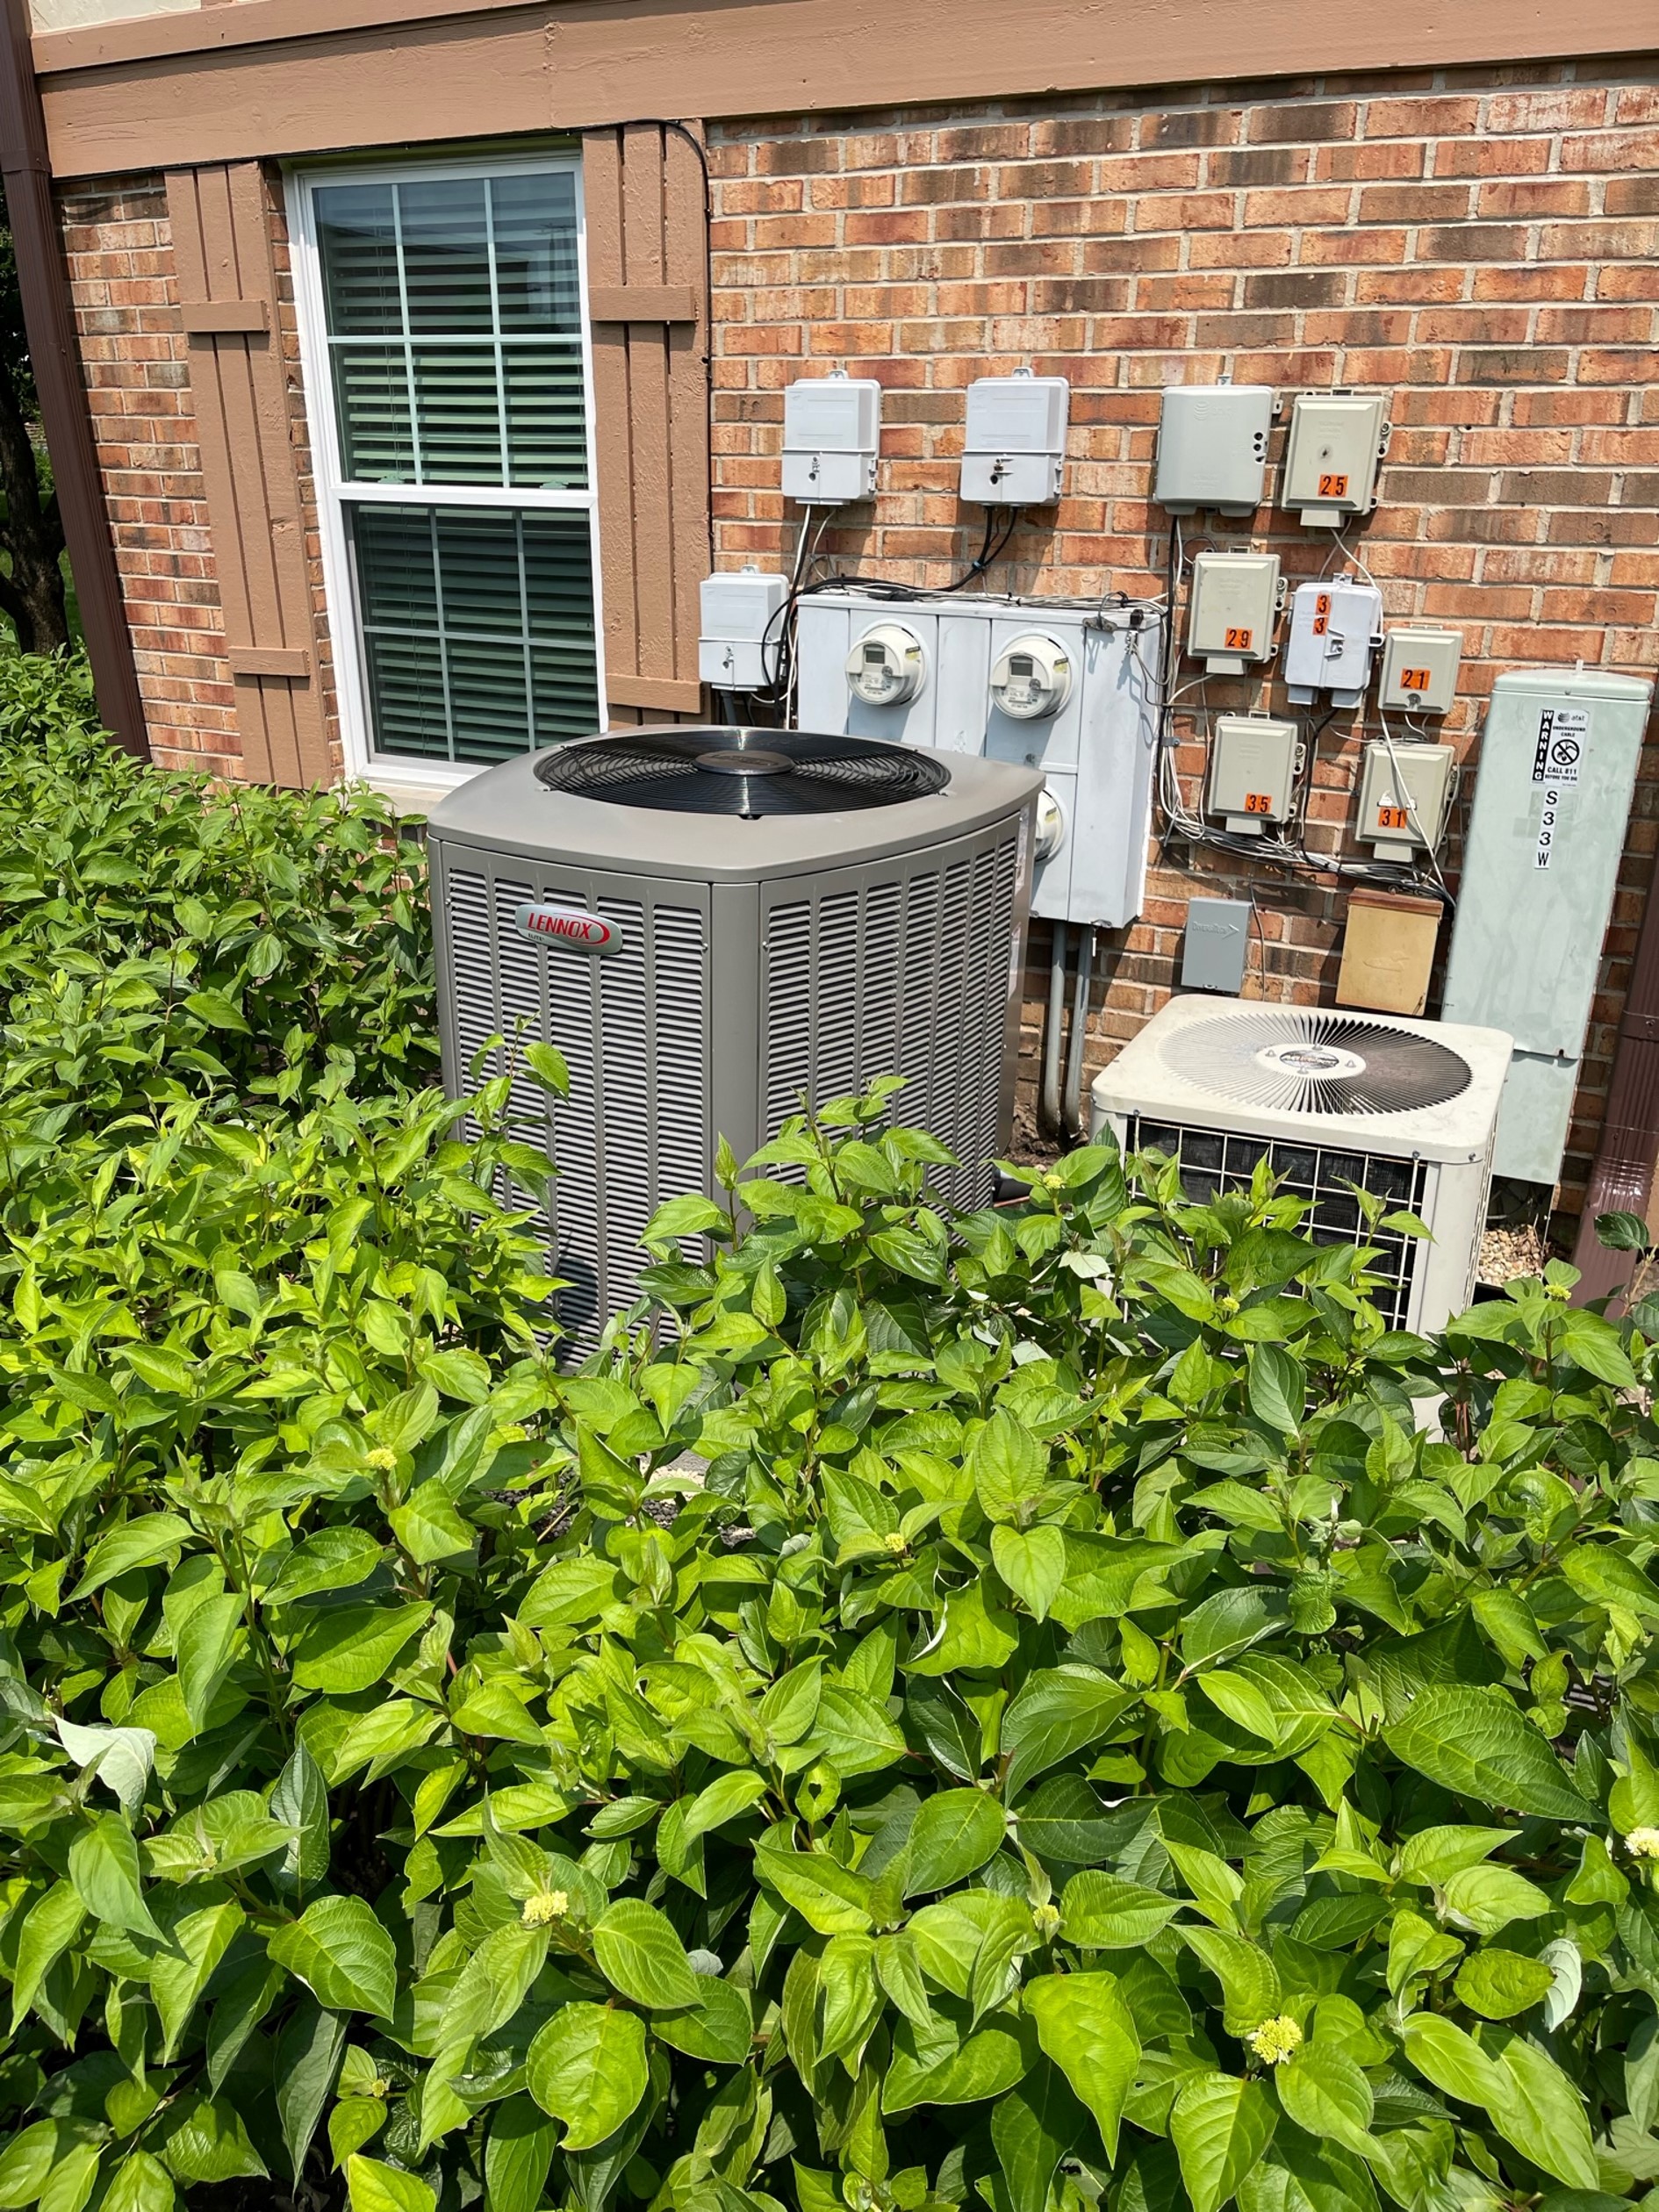 eep your HVAC system in peak condition with our maintenance services. Pure Comfort Heating and Air Conditioning offers regular inspections and tune-ups to maximize efficiency and longevity.